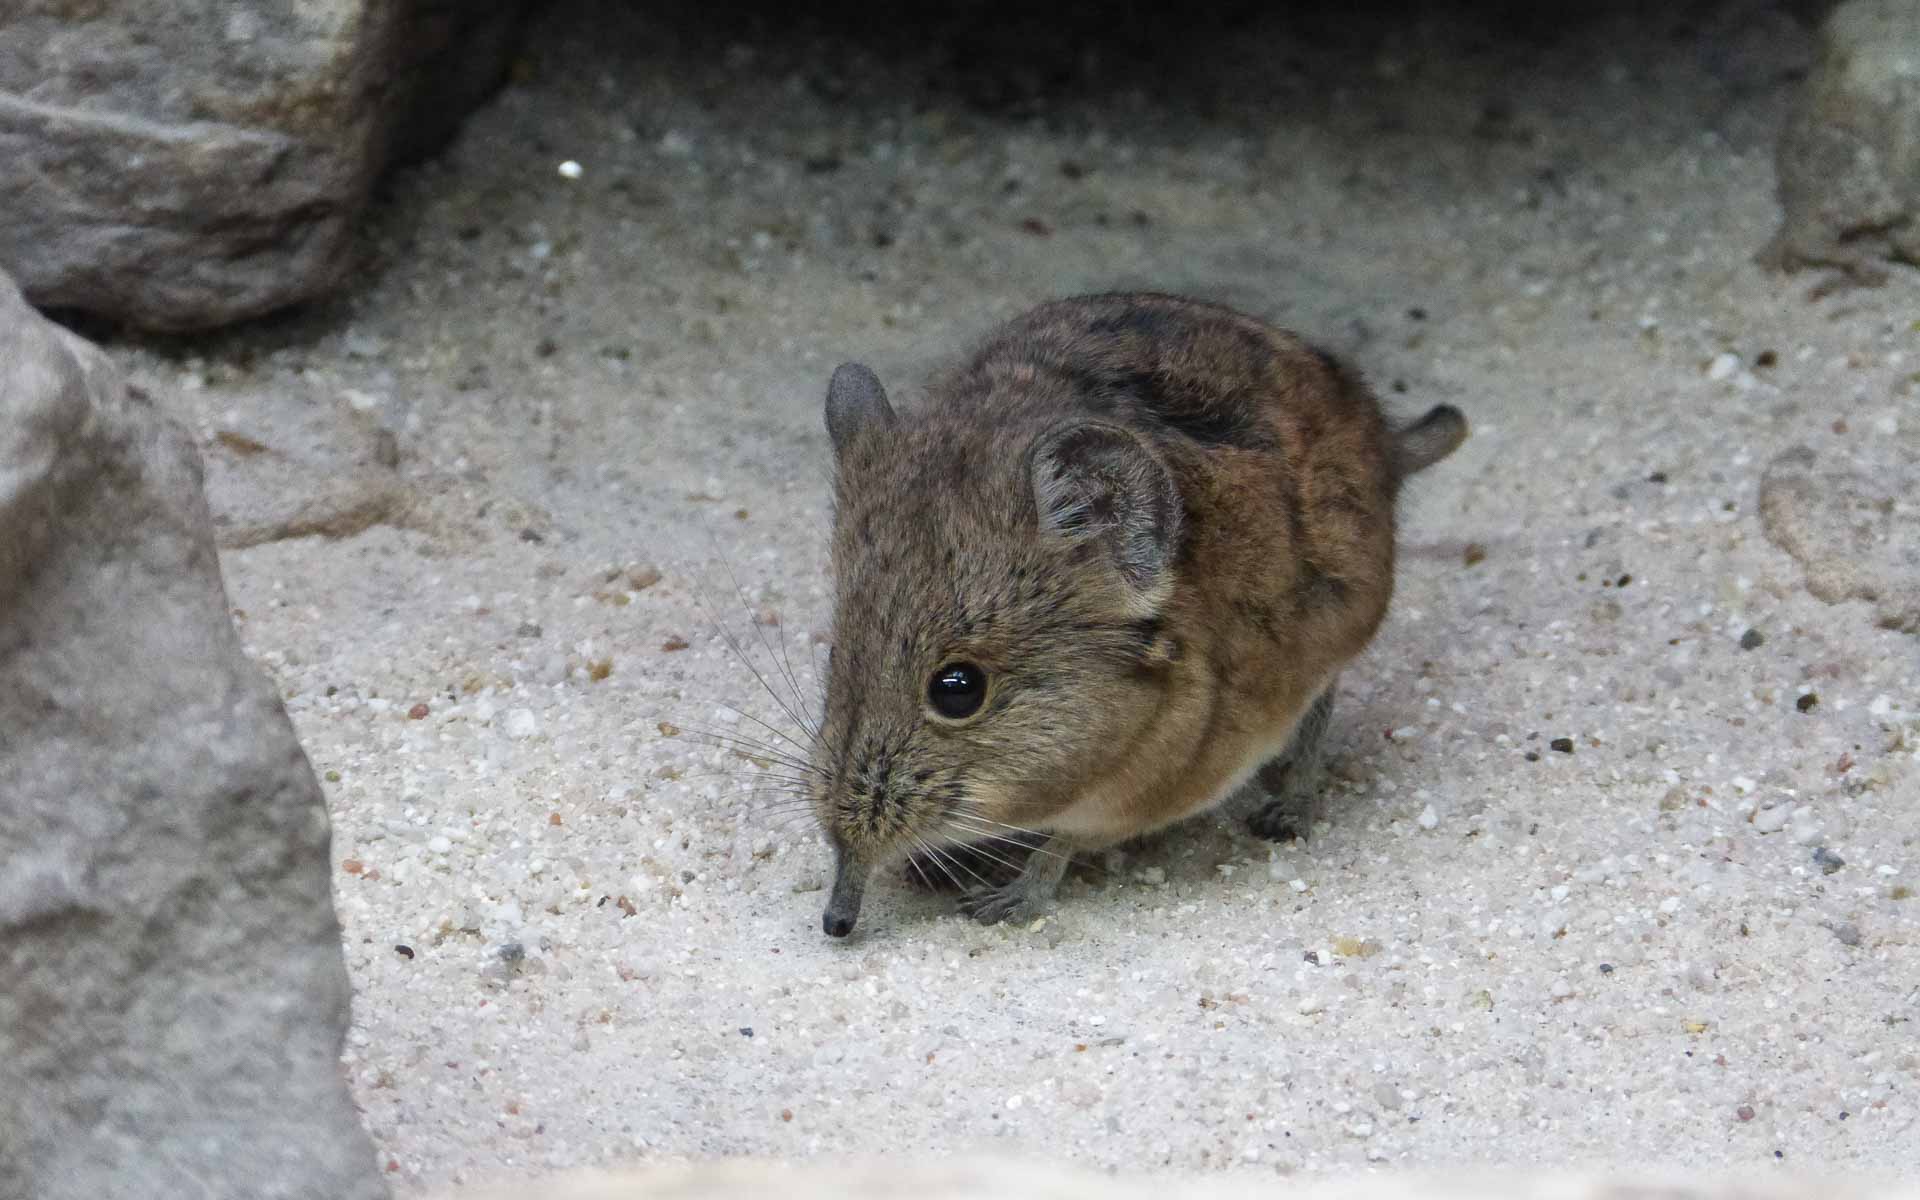 A frontal image of a short-eared elephant shrew - one of Africa’s animals and part of the Small Five of Africa.